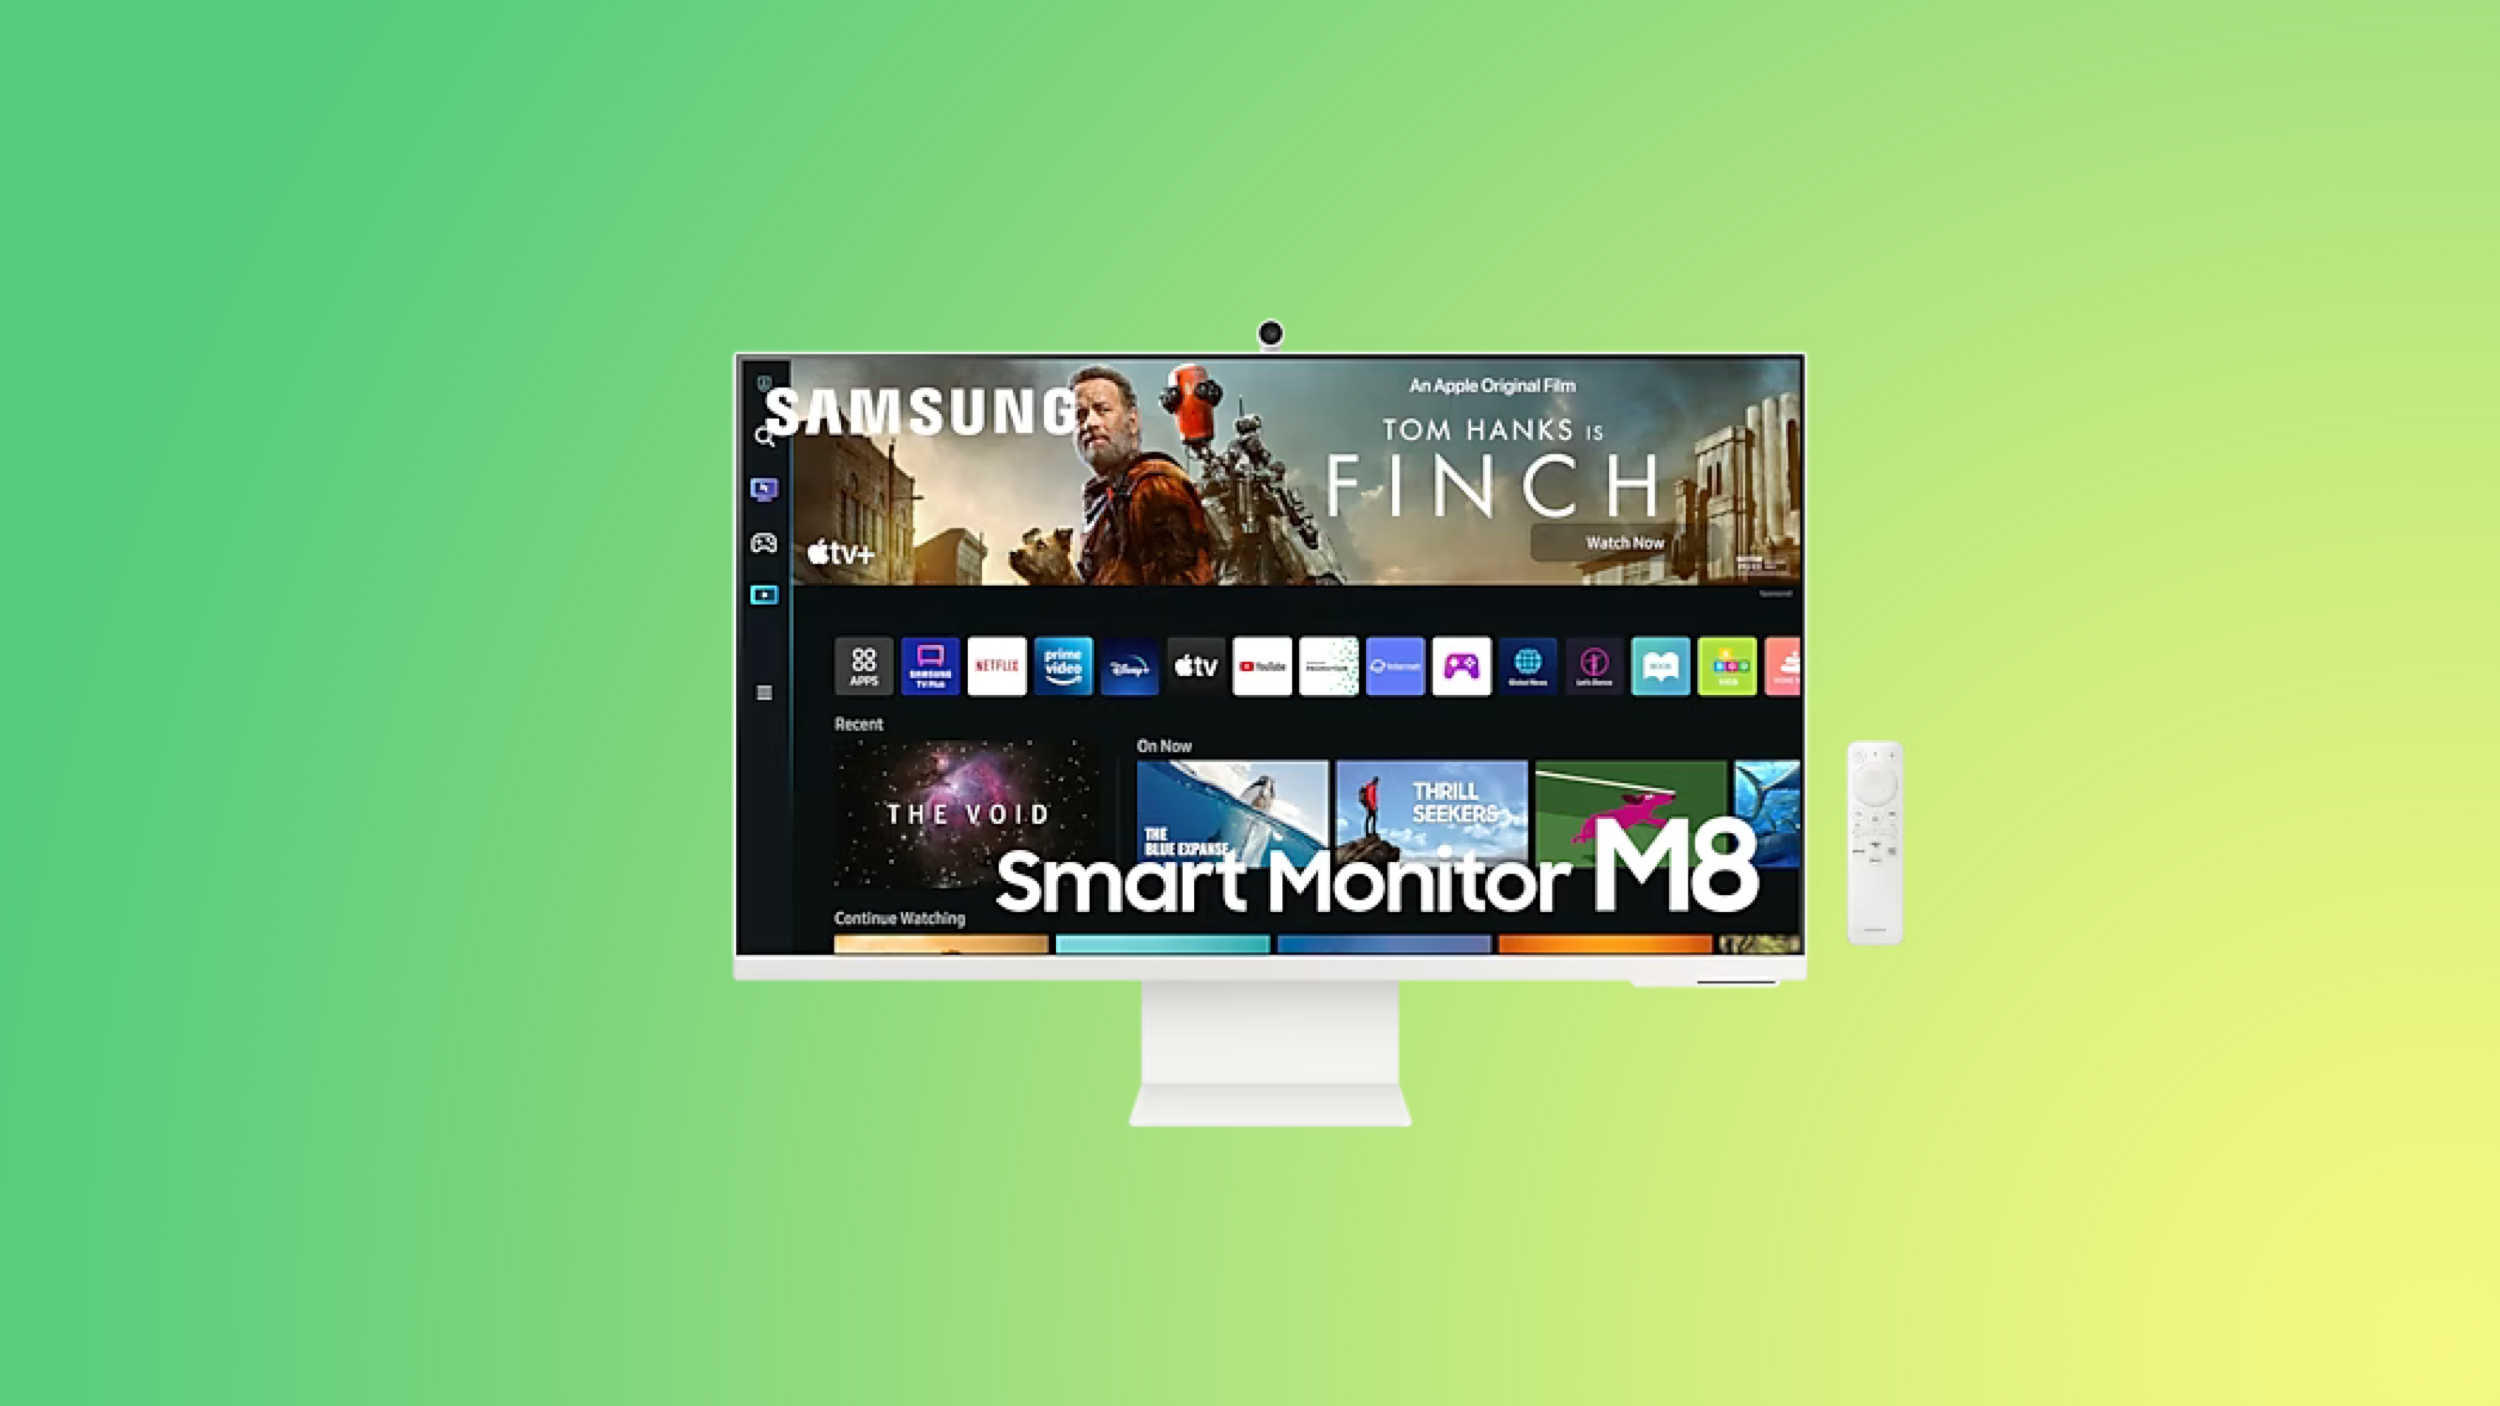 Deals: Samsung’s iMac-Like Smart Monitor M8 Drops to Lowest Price of Year So Far With $250 Discount